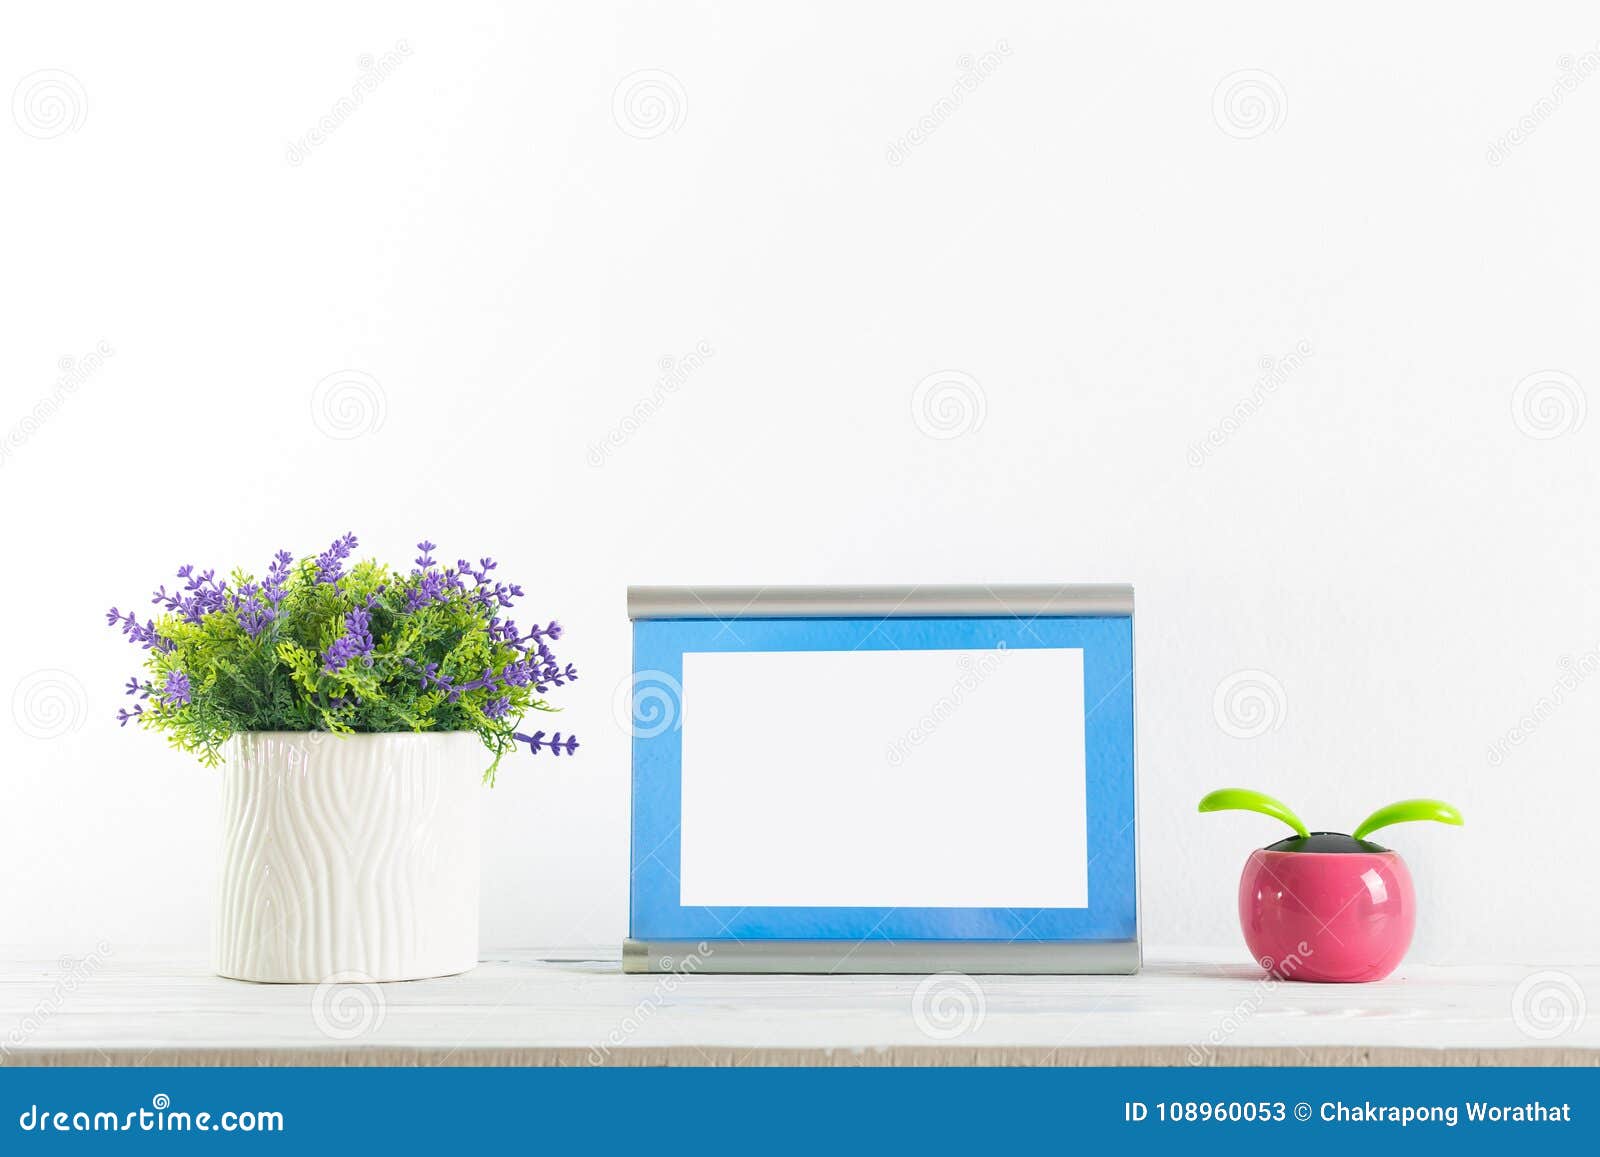 fowers and blue frame on a white with wall shelf.